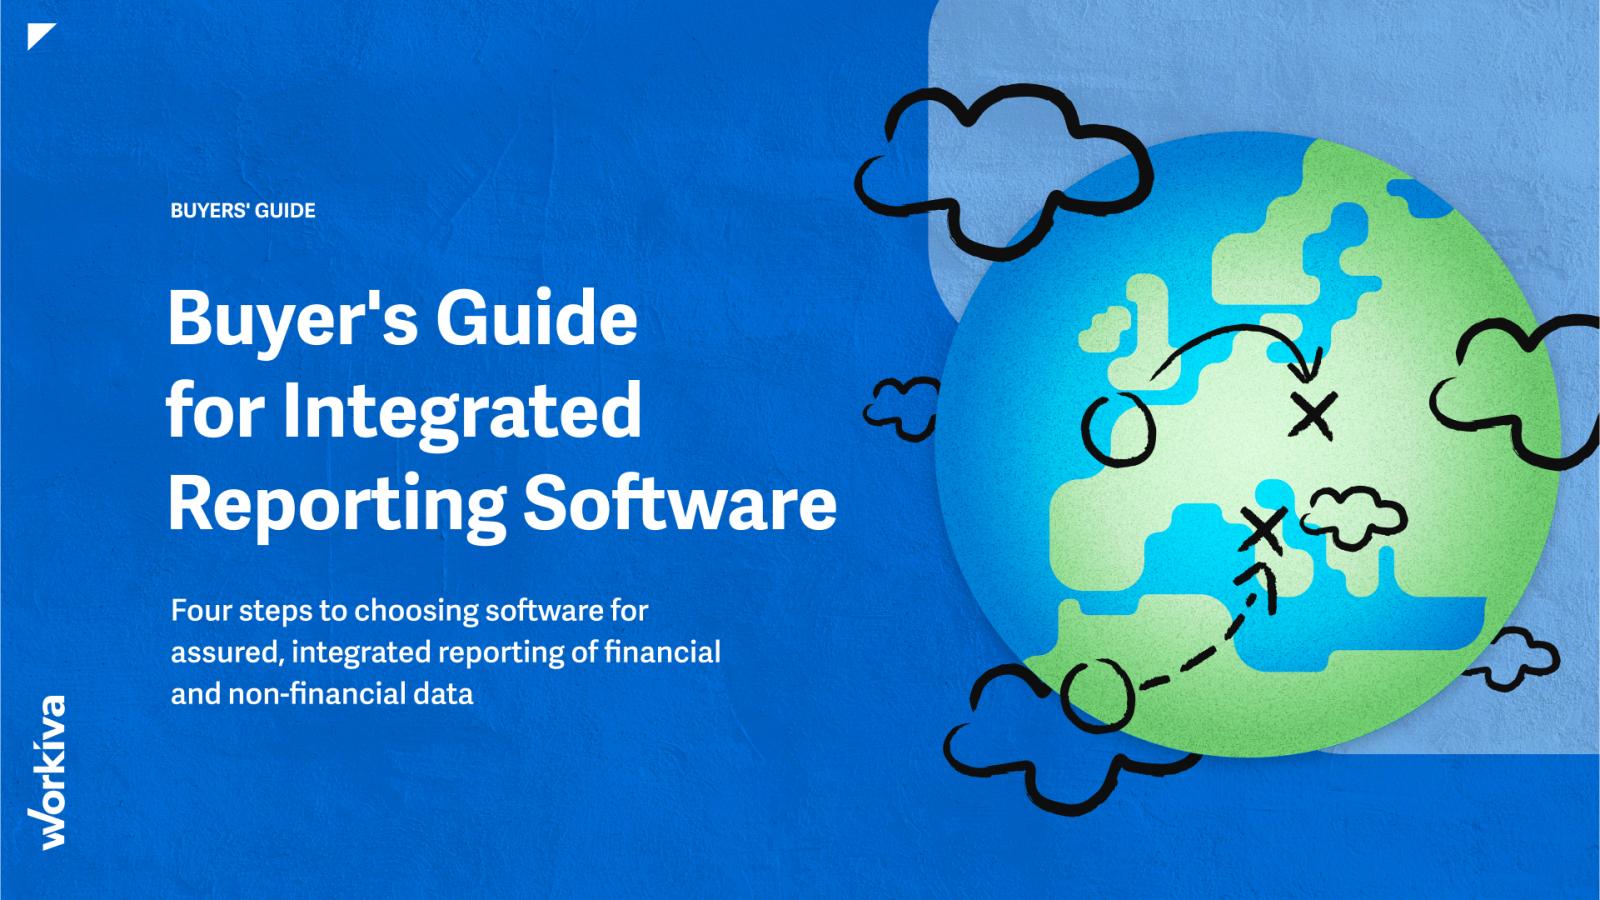 The Workiva buyer's guide to choosing software for integrated reporting of financial and ESG data